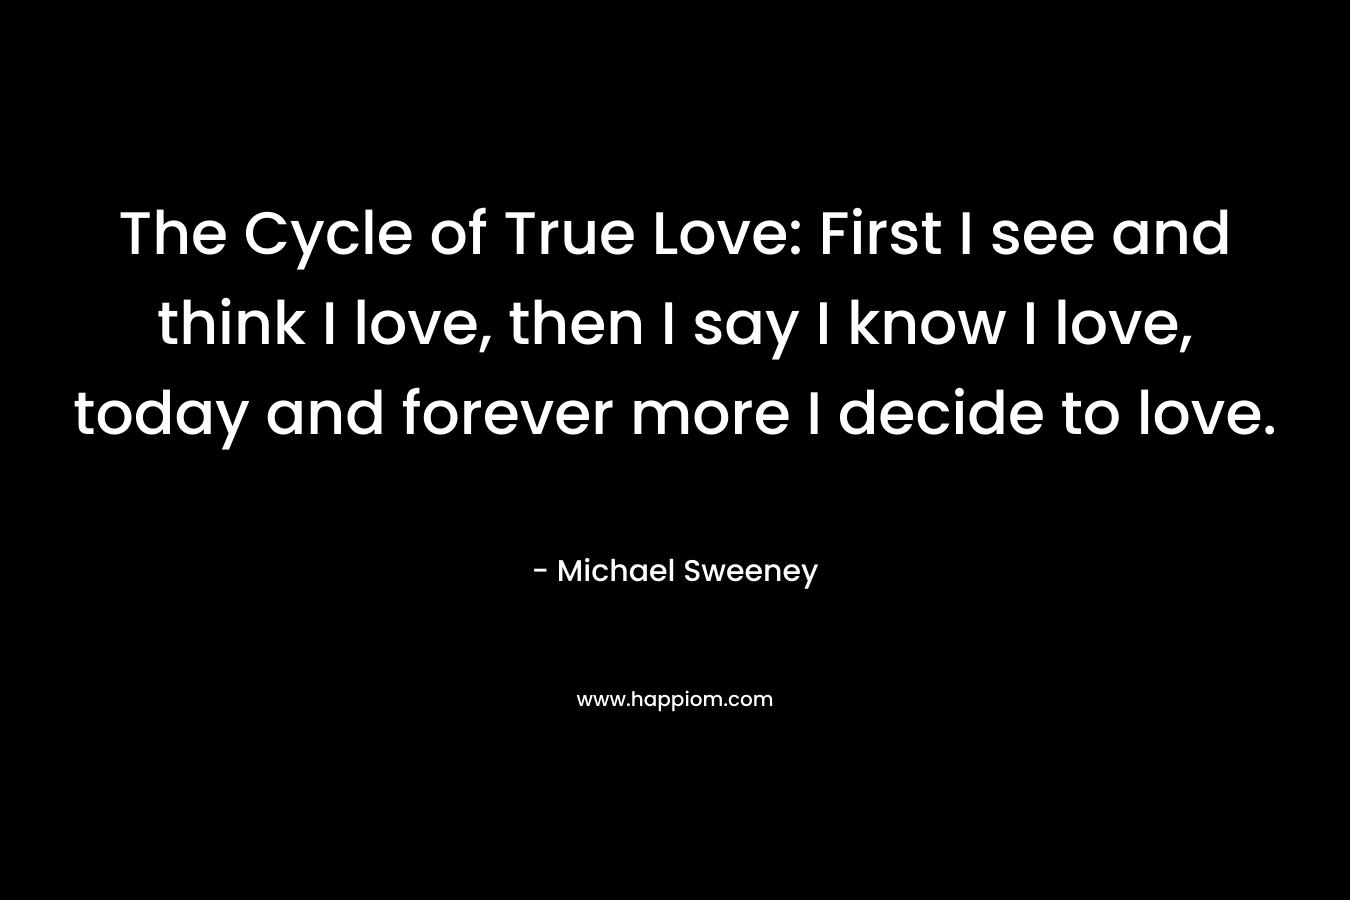 The Cycle of True Love: First I see and think I love, then I say I know I love, today and forever more I decide to love. – Michael Sweeney